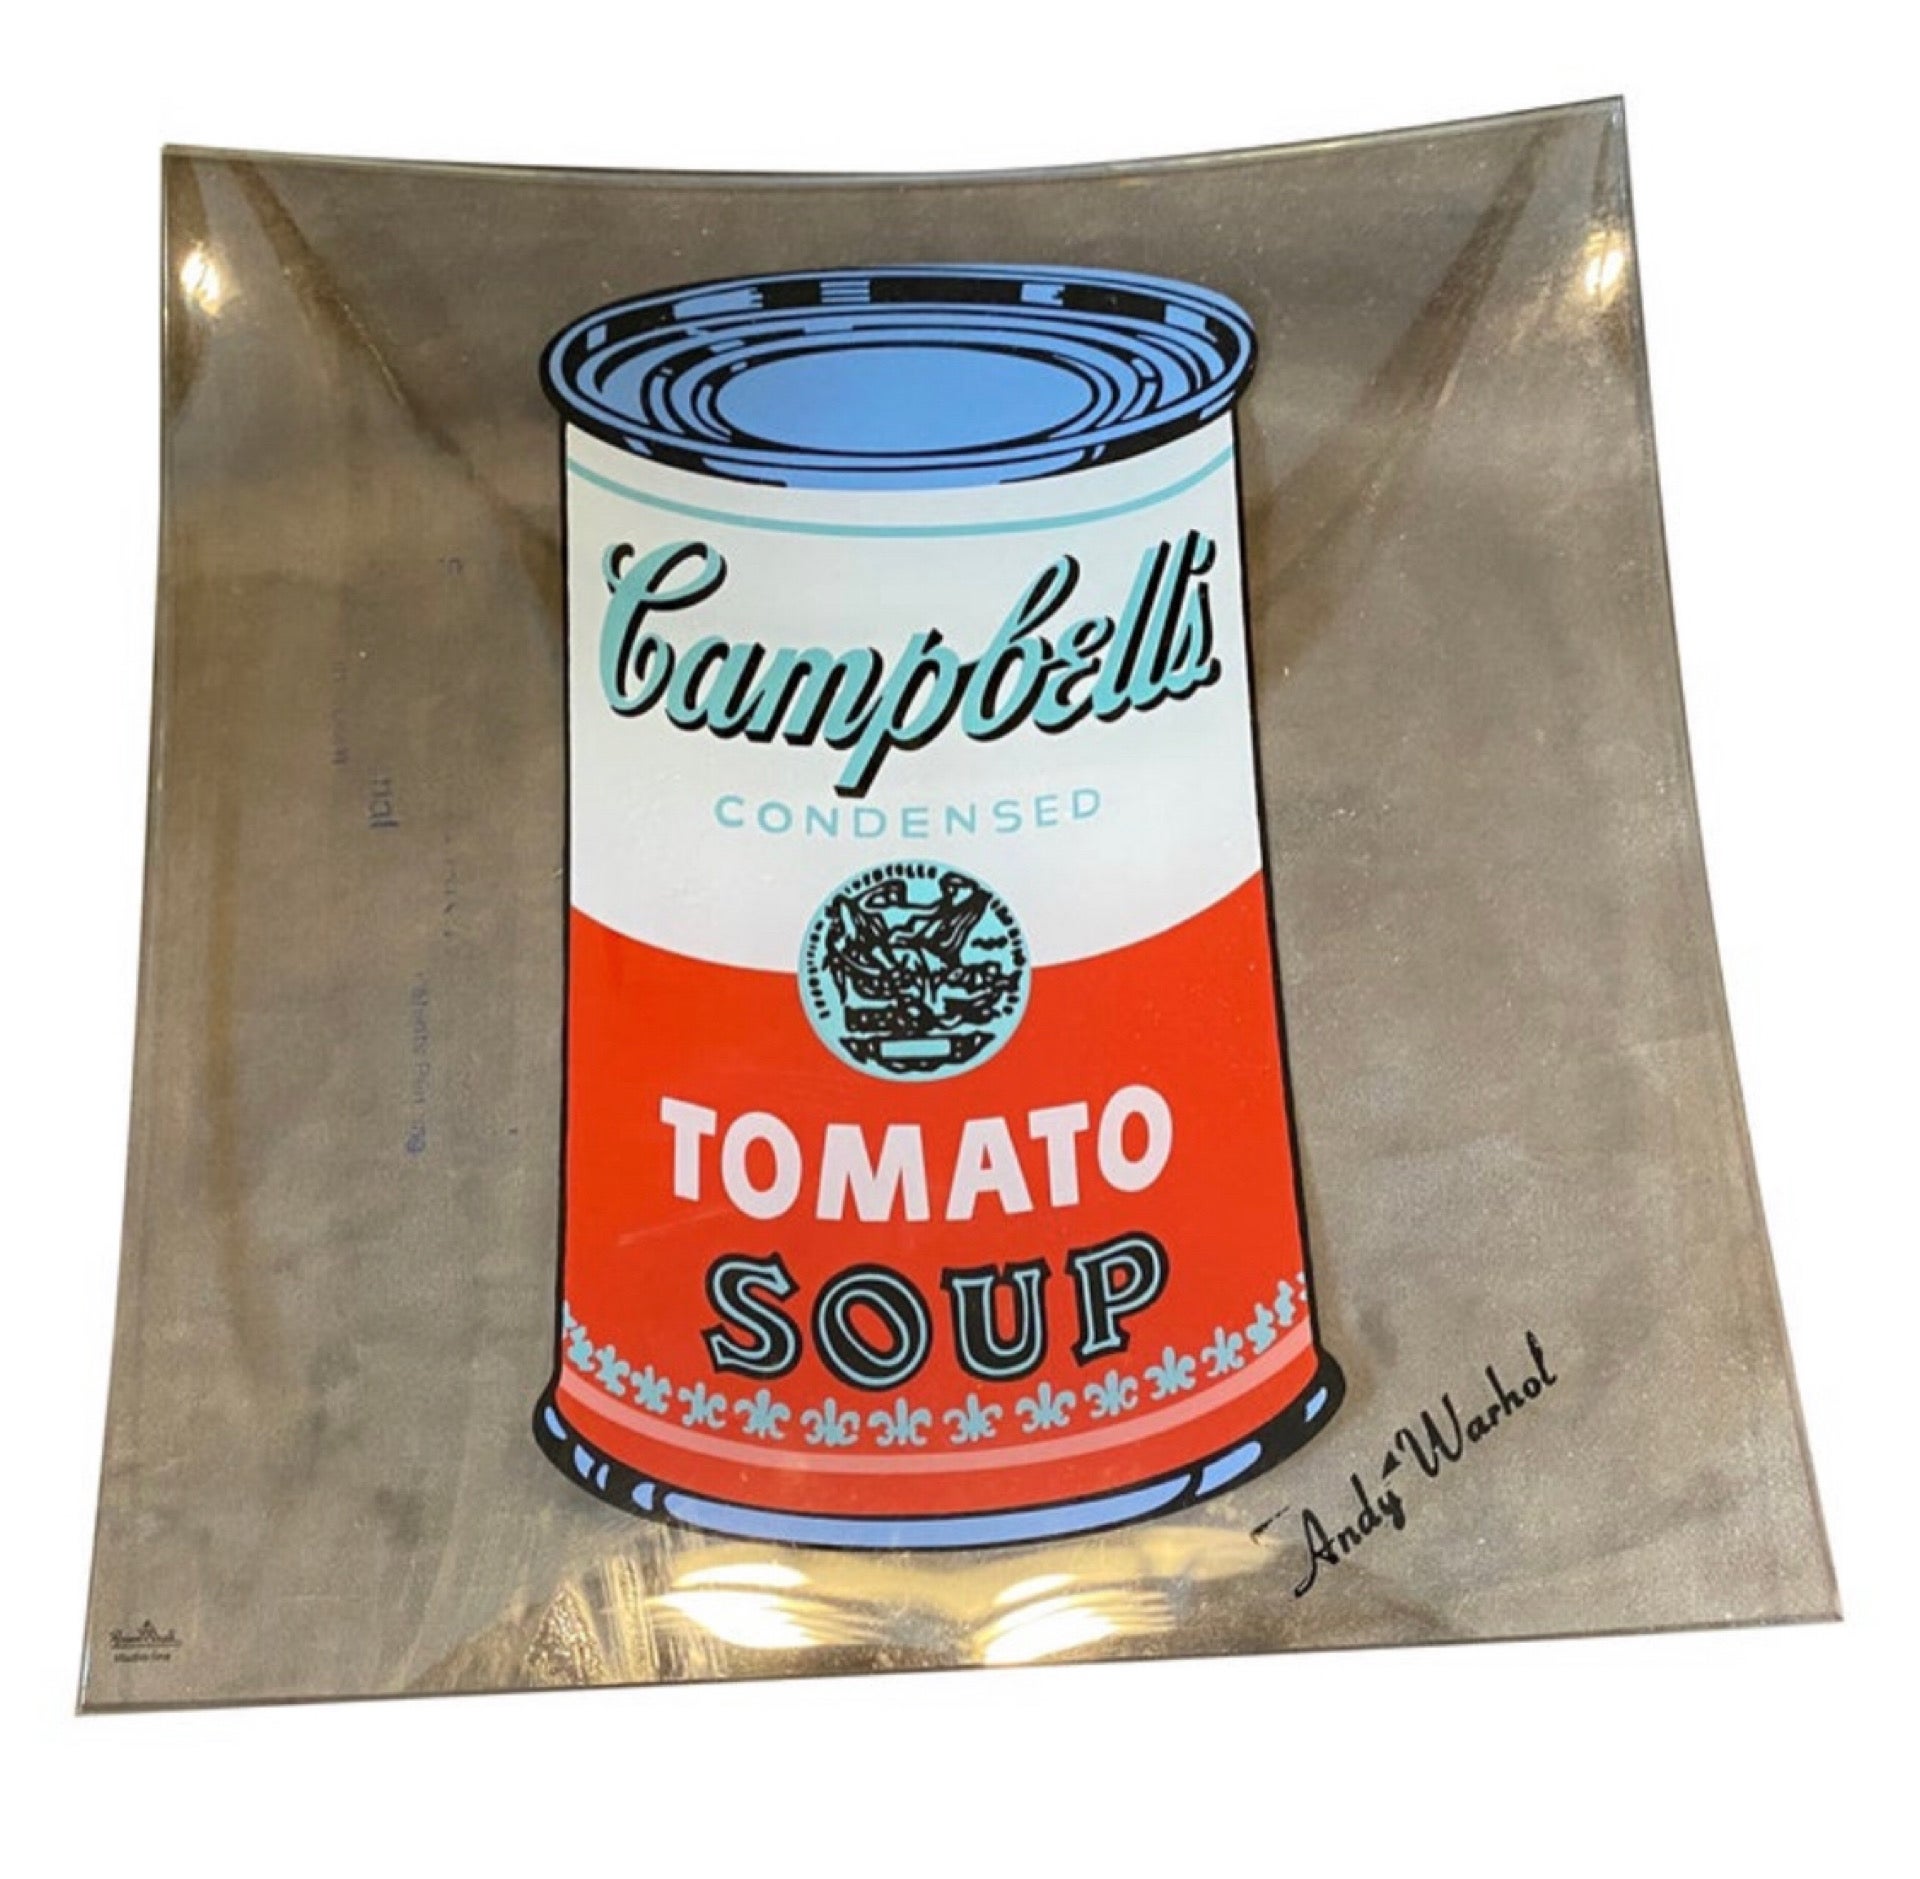 The Rosenthal campbell soup glass small tray designed by Andy Warhol is a piece of pop art that captures the iconic imagery of the Campbell's Soup can in a functional and stylish manner. The tray is made  of high-quality glass, with a smooth and